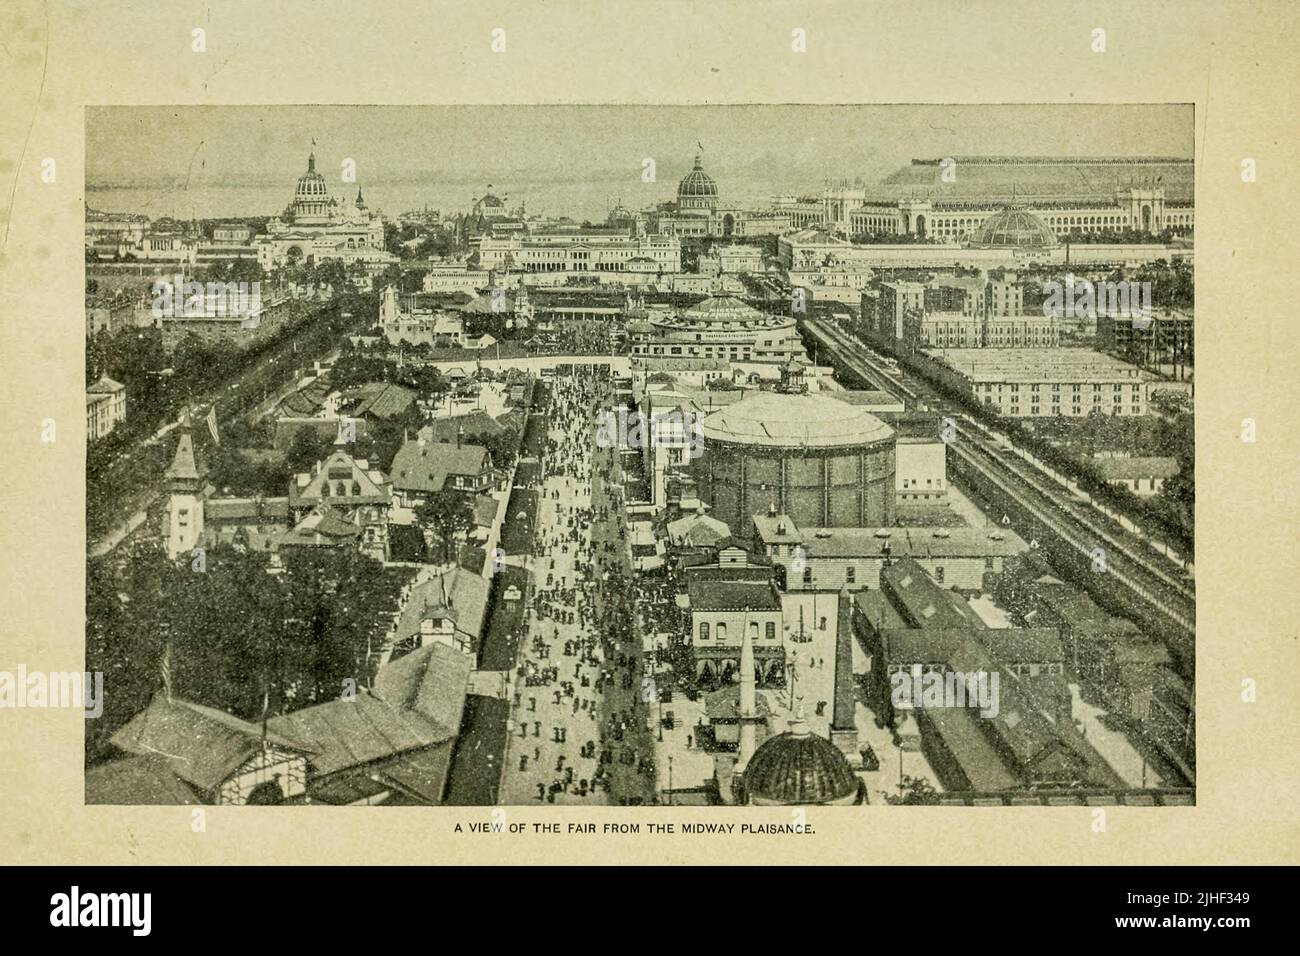 A View of the Fair Grounds from the Midway Plaisance World's Columbian Exposition Chicago 1893 from Factory and industrial management Magazine Volume 6 1891 Publisher New York [etc.] McGraw-Hill [etc.] Stock Photo